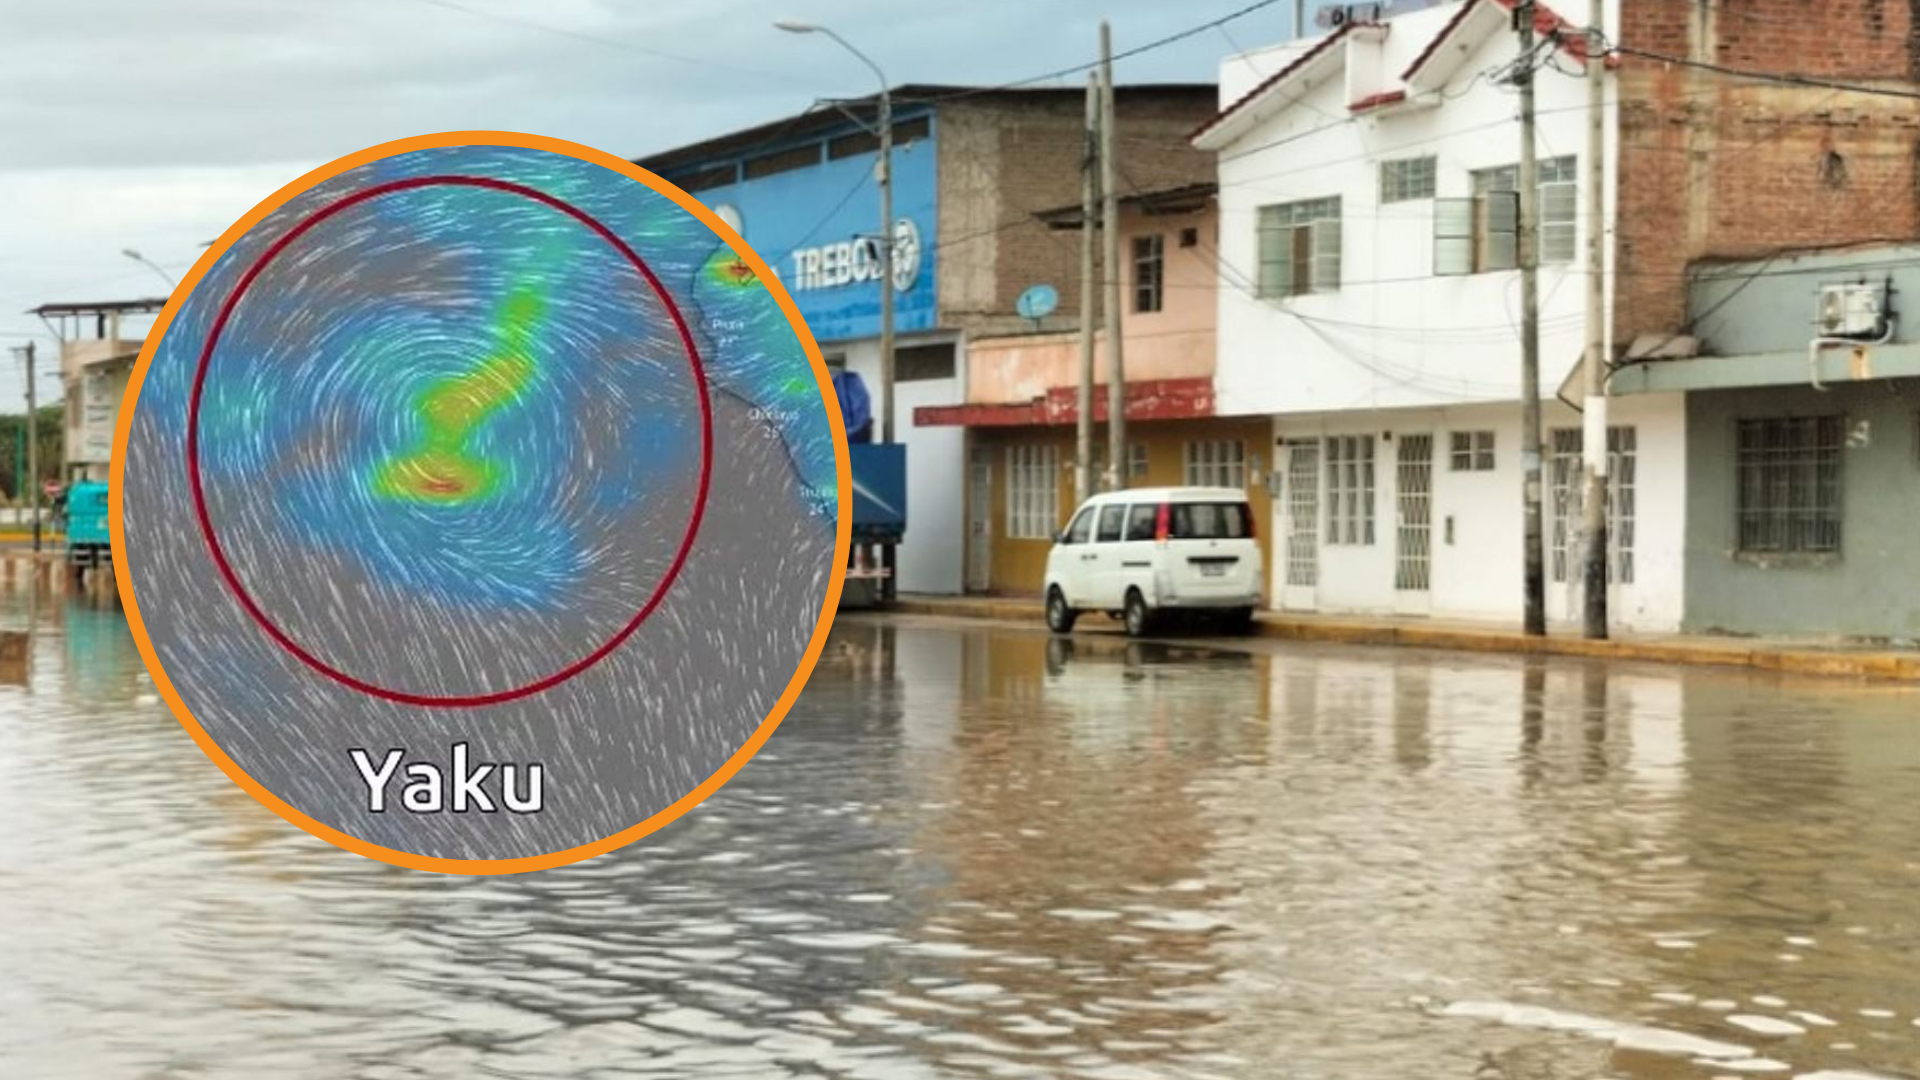 Cyclone Yaku: 7 regions with a very high risk of flooding due to heavy rains and river overflows